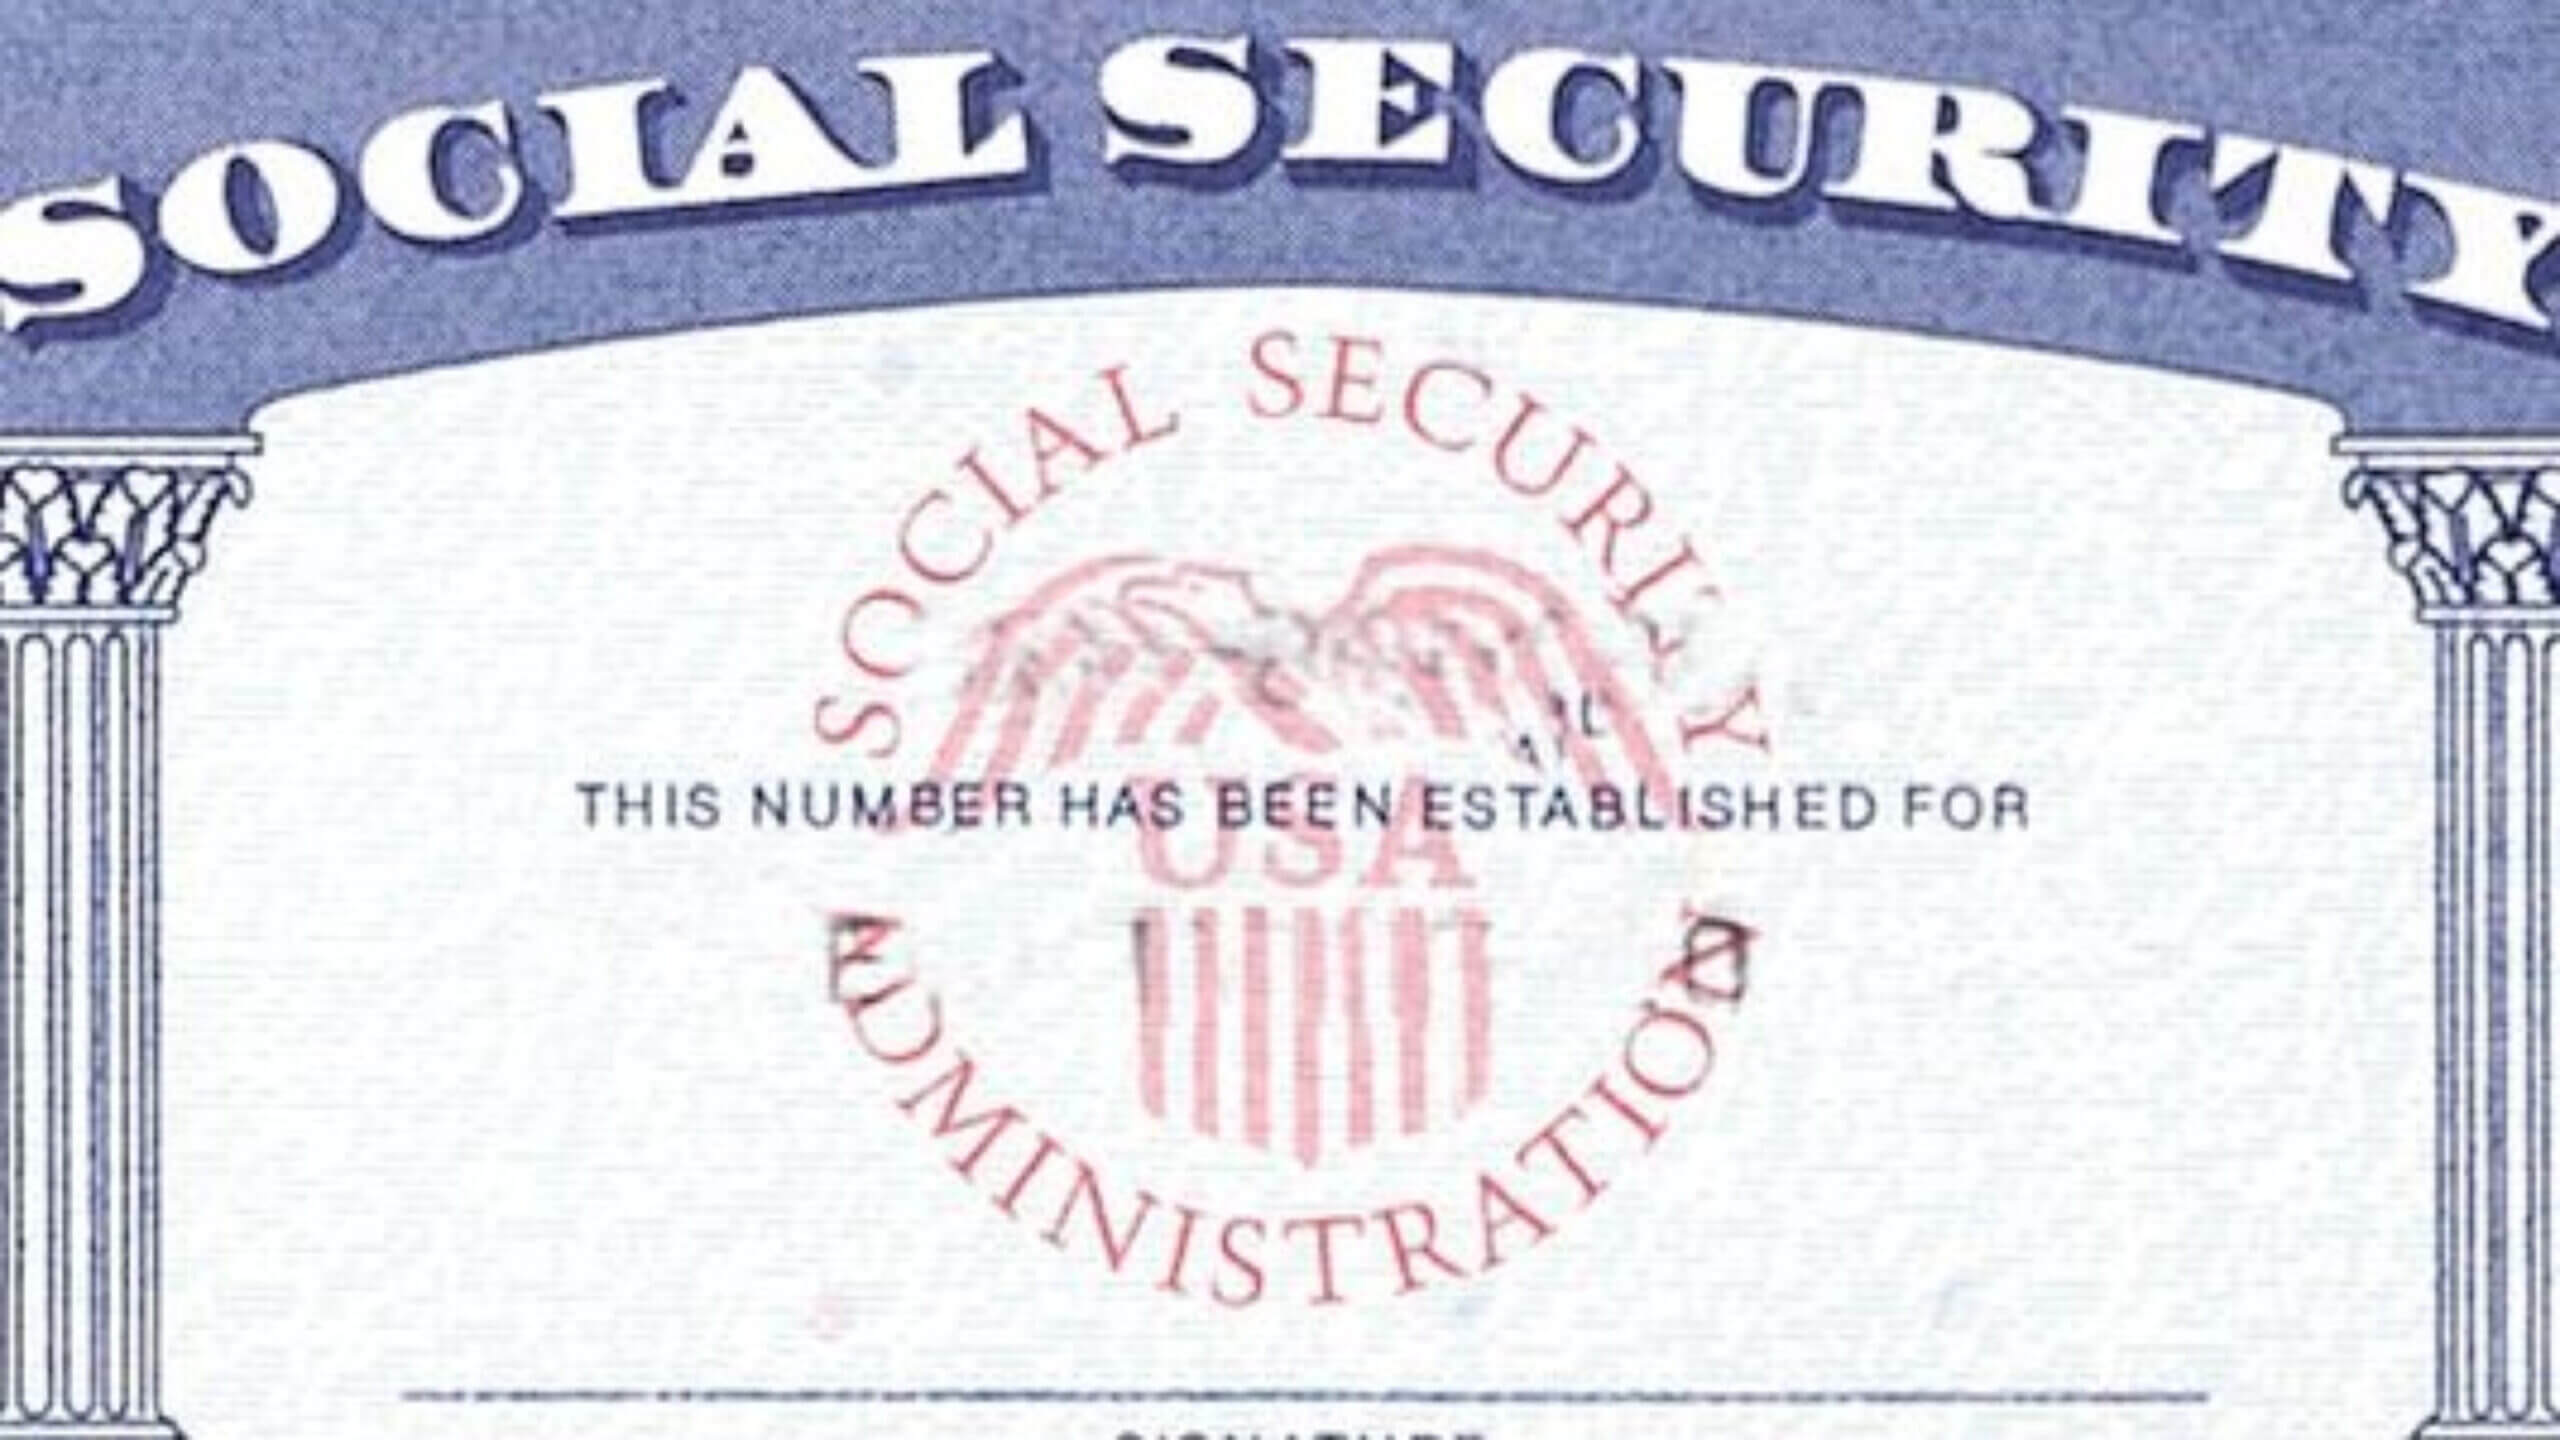 9 Psd Social Security Cards Printable Images - Social Intended For Social Security Card Template Pdf